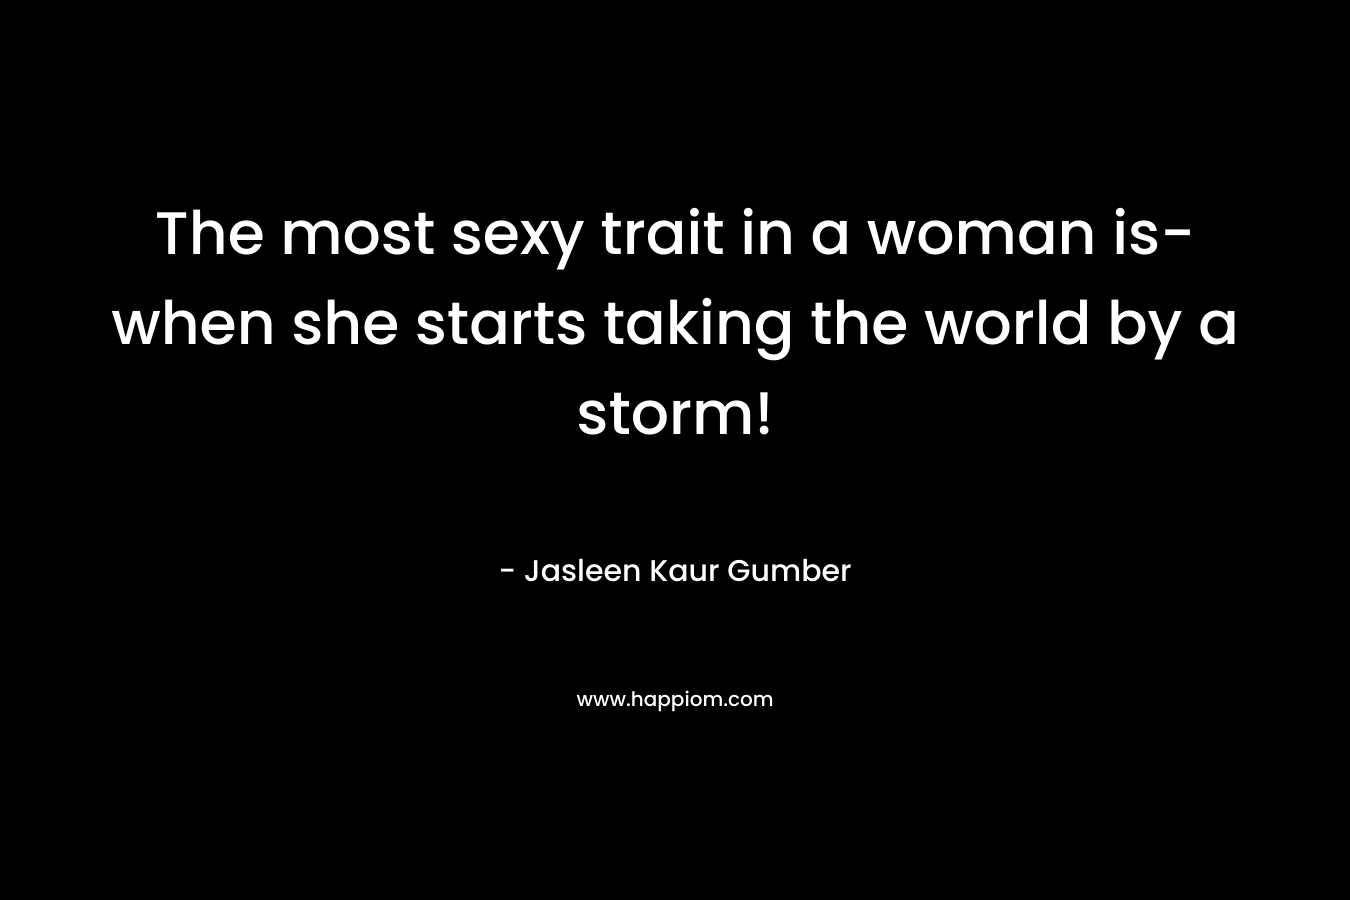 The most sexy trait in a woman is- when she starts taking the world by a storm!